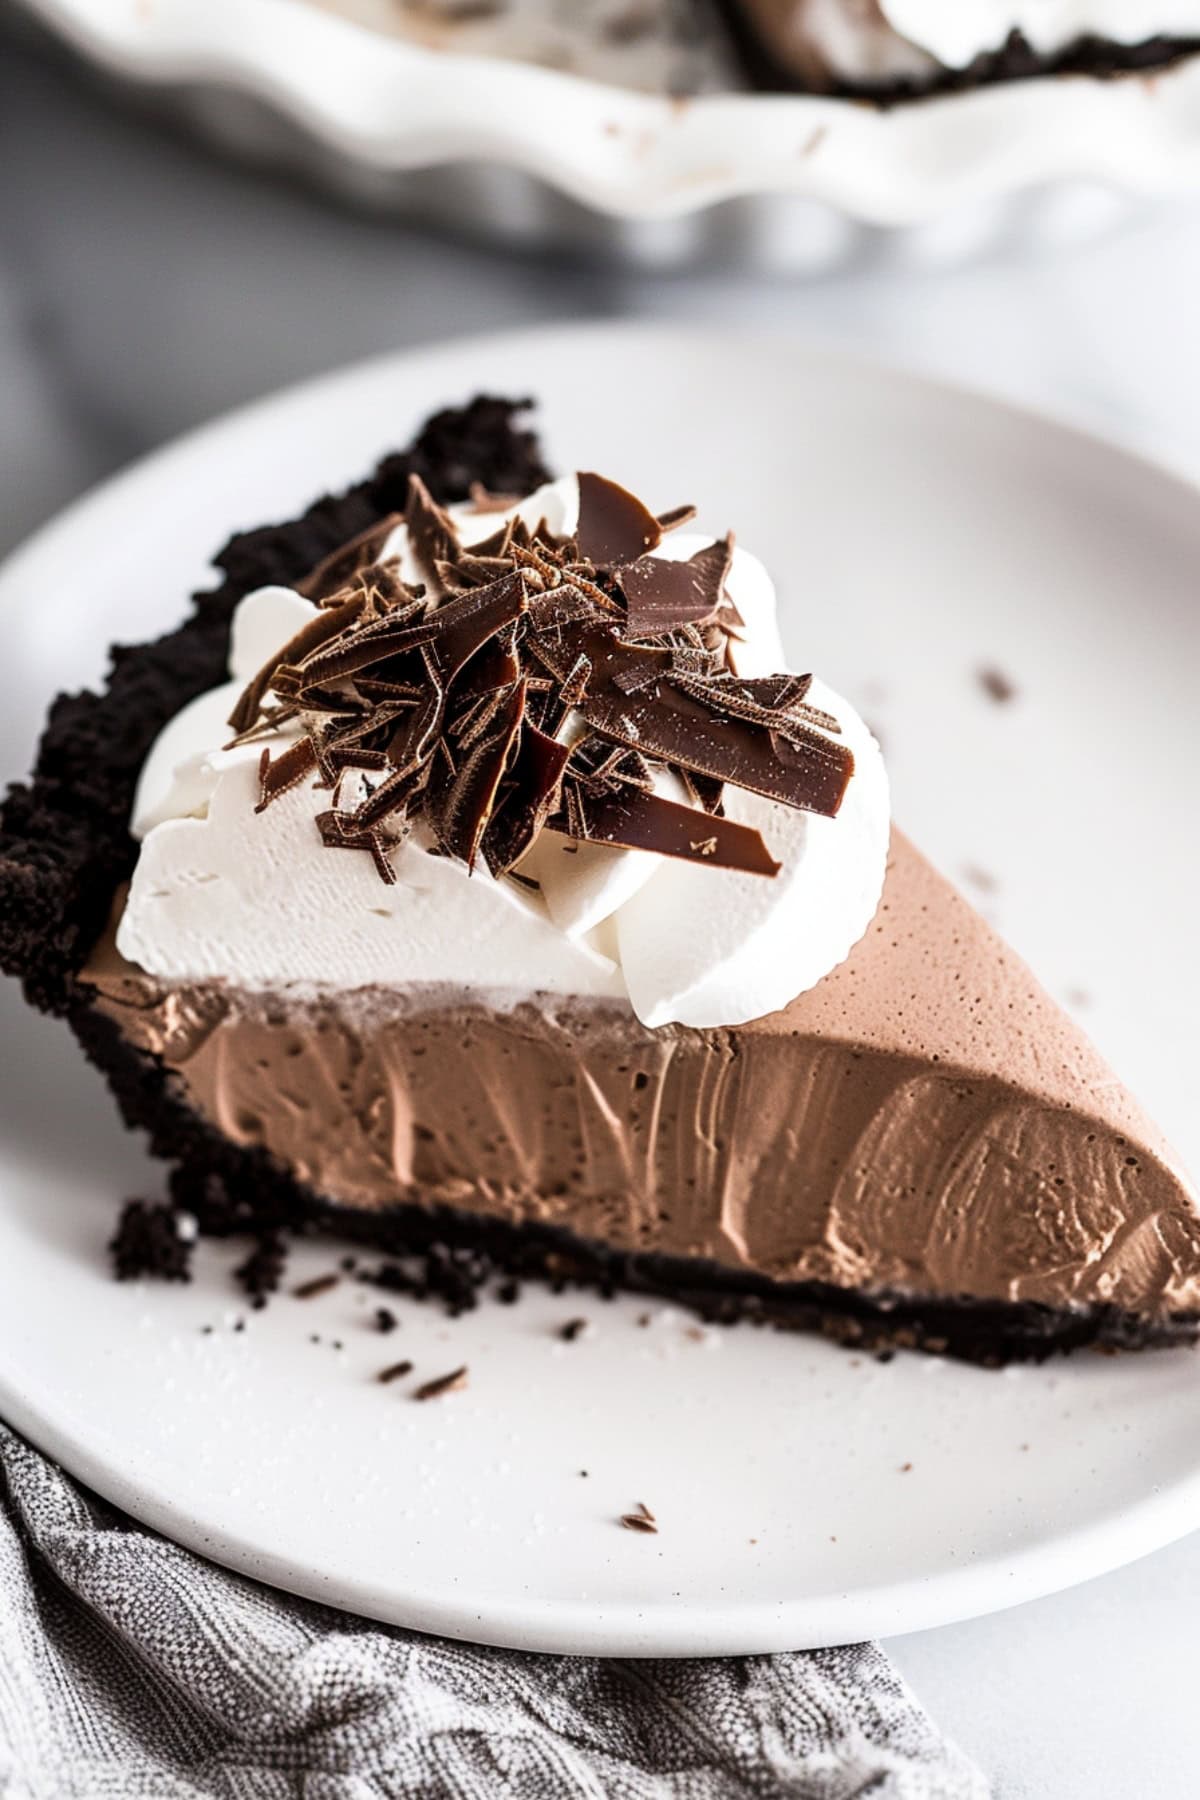 A decadent slice of French silk pie topped with whipped cream and chocolate shavings on a white plate